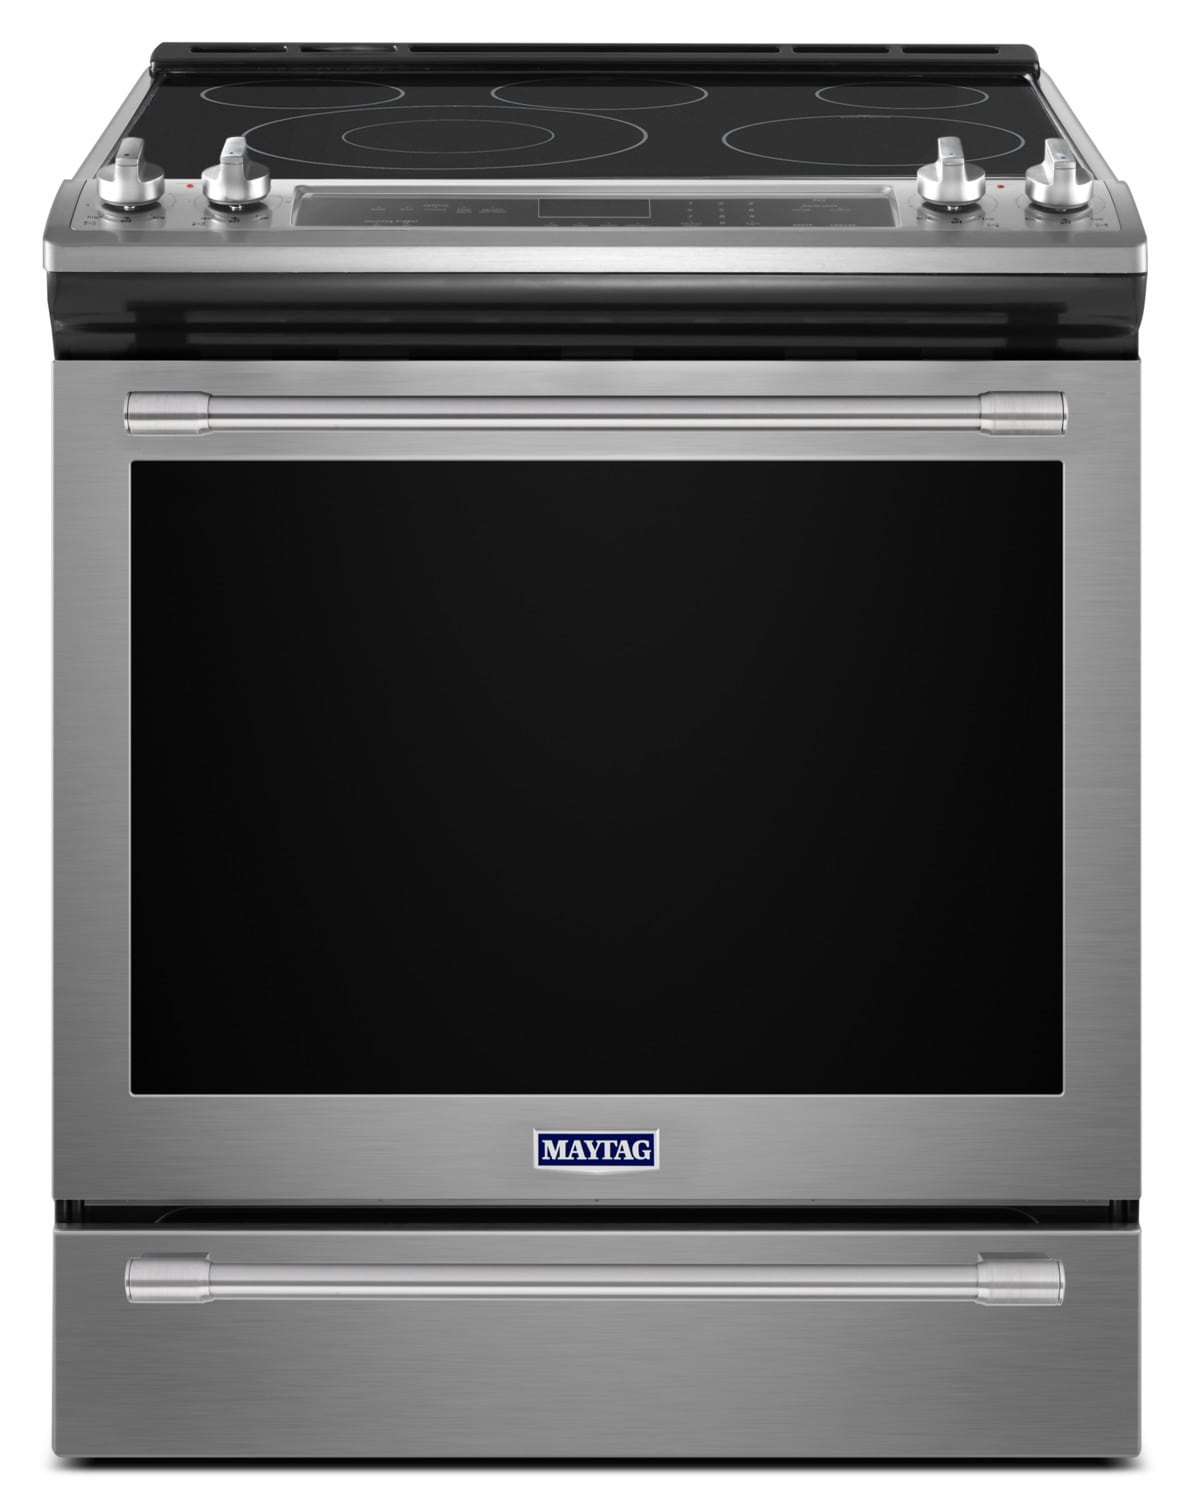 Maytag Stainless Steel Slide-In Electric Convection Range (6.4 Cu. Ft